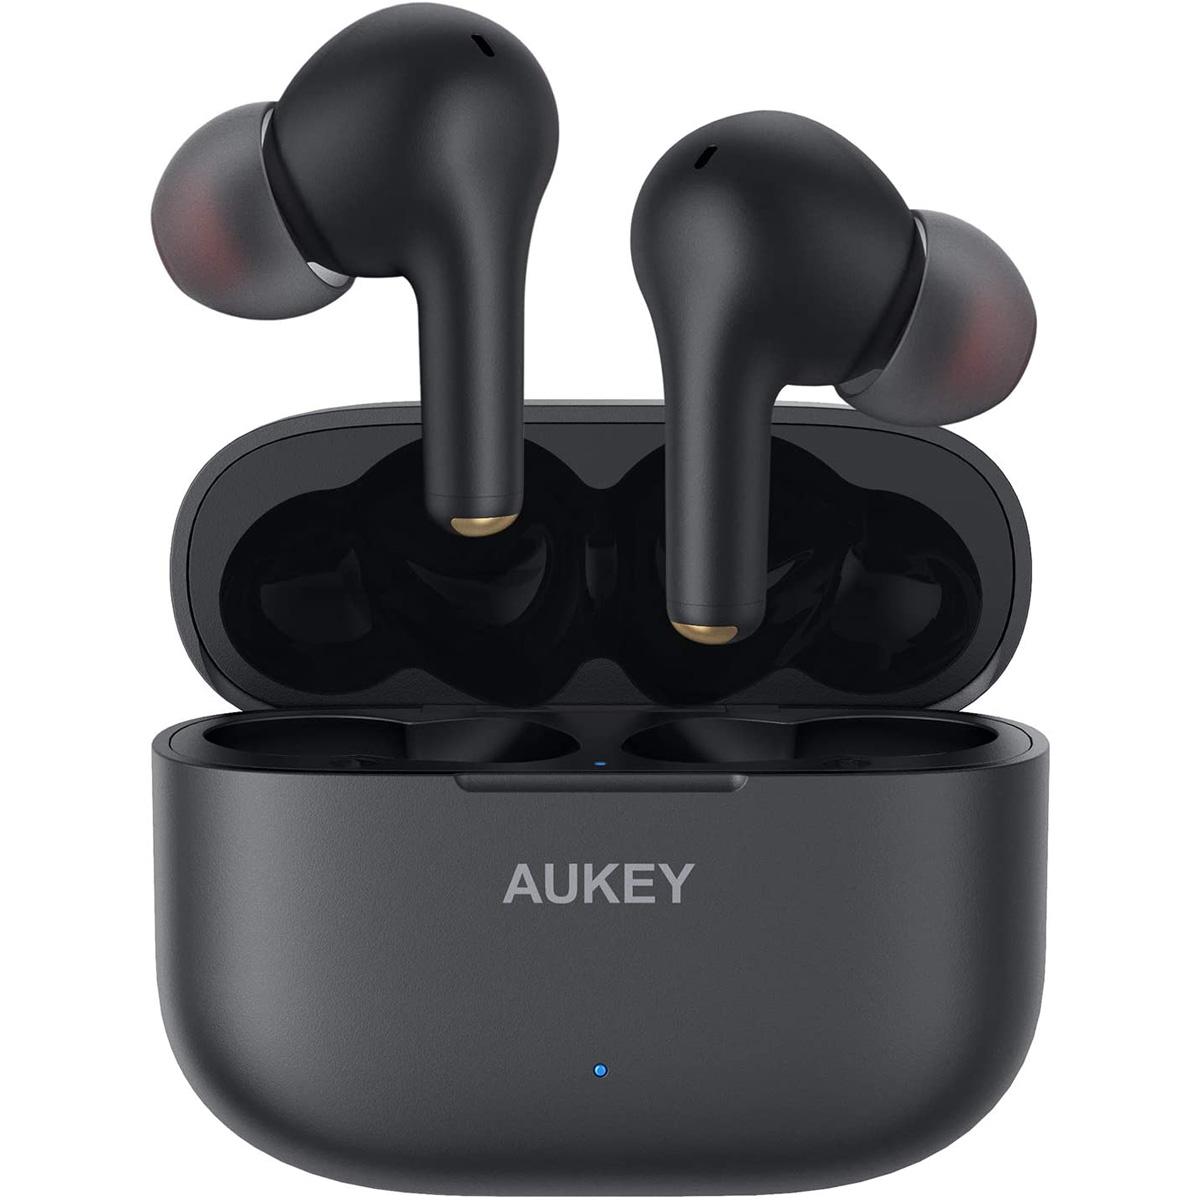 Aukey EP-T27 True Wireless Bluetooth IPX7 Earbuds for $27.49 Shipped